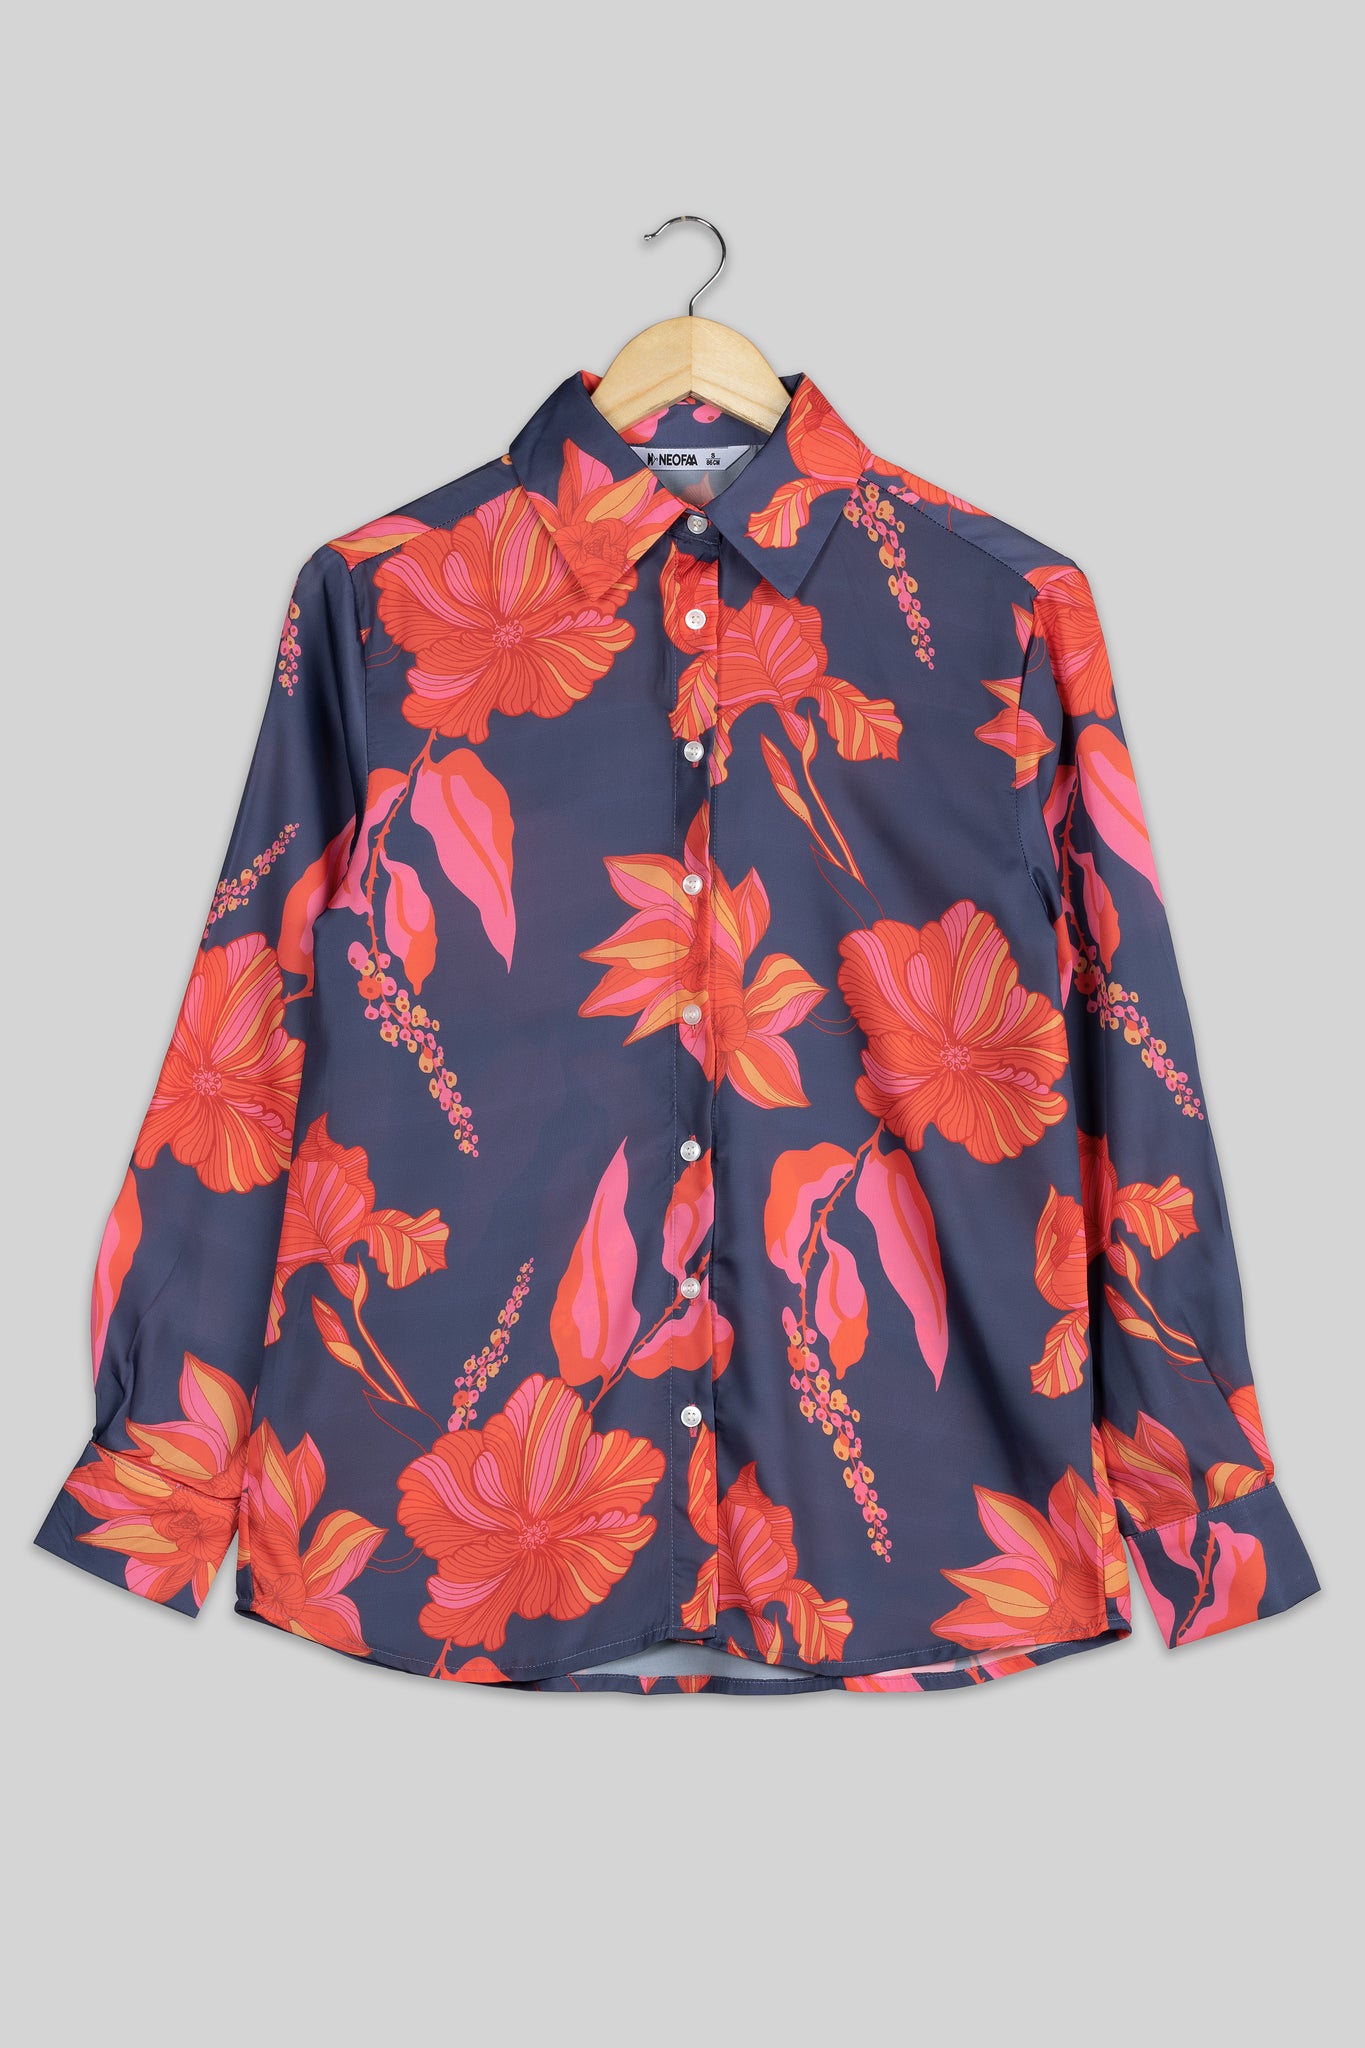 Majestic Blue Floral Shirt For Women